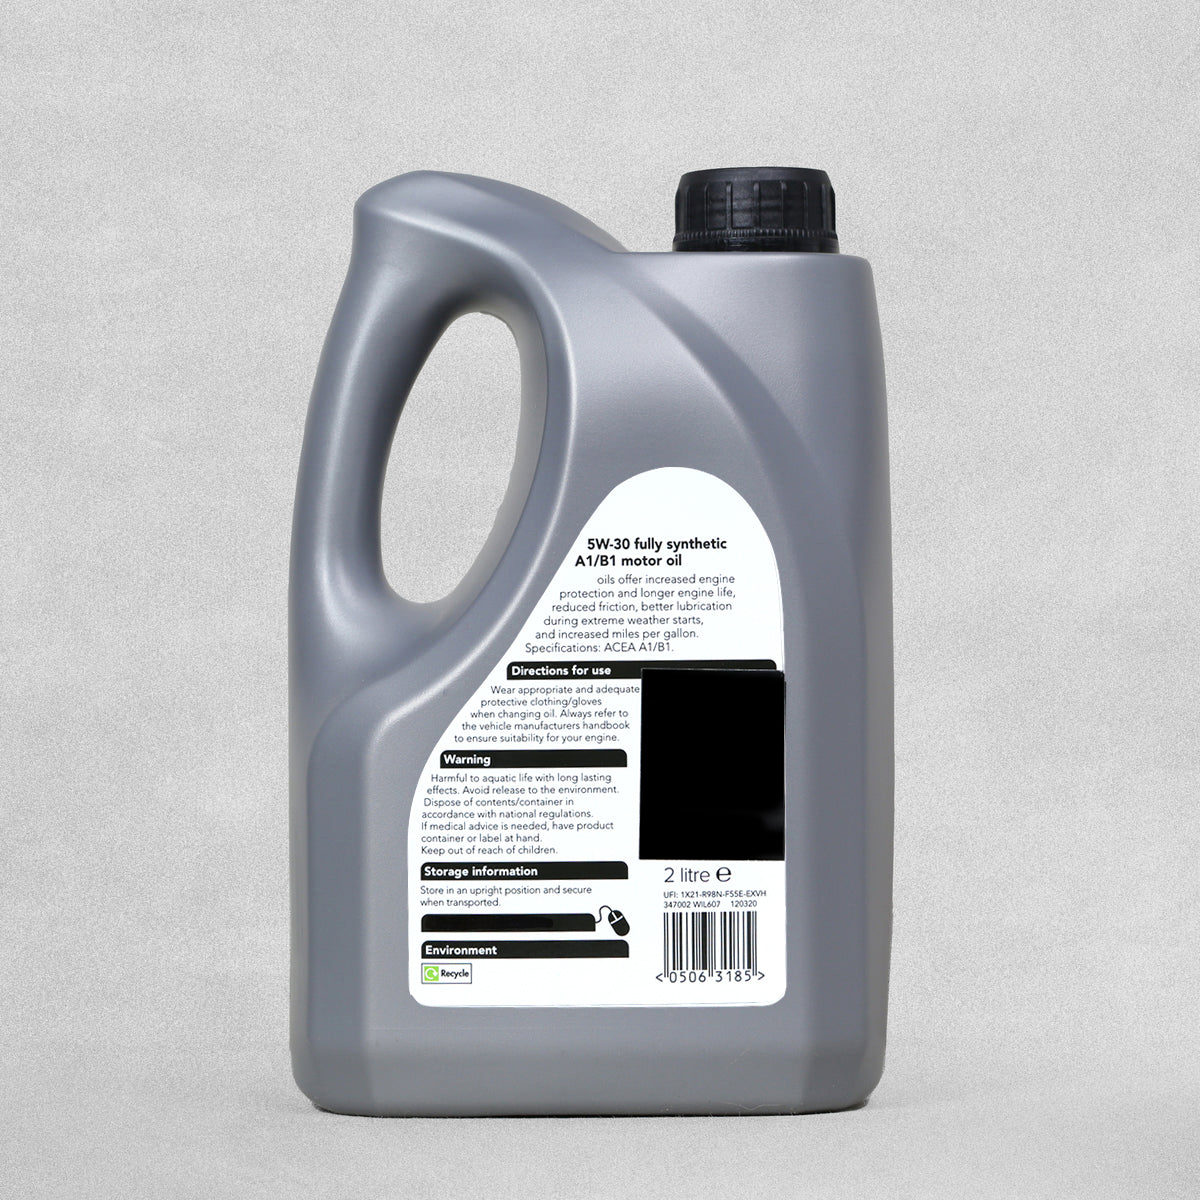 5W-30 Fully Synthetic A1/B1  Motor Oil - 2 Litres